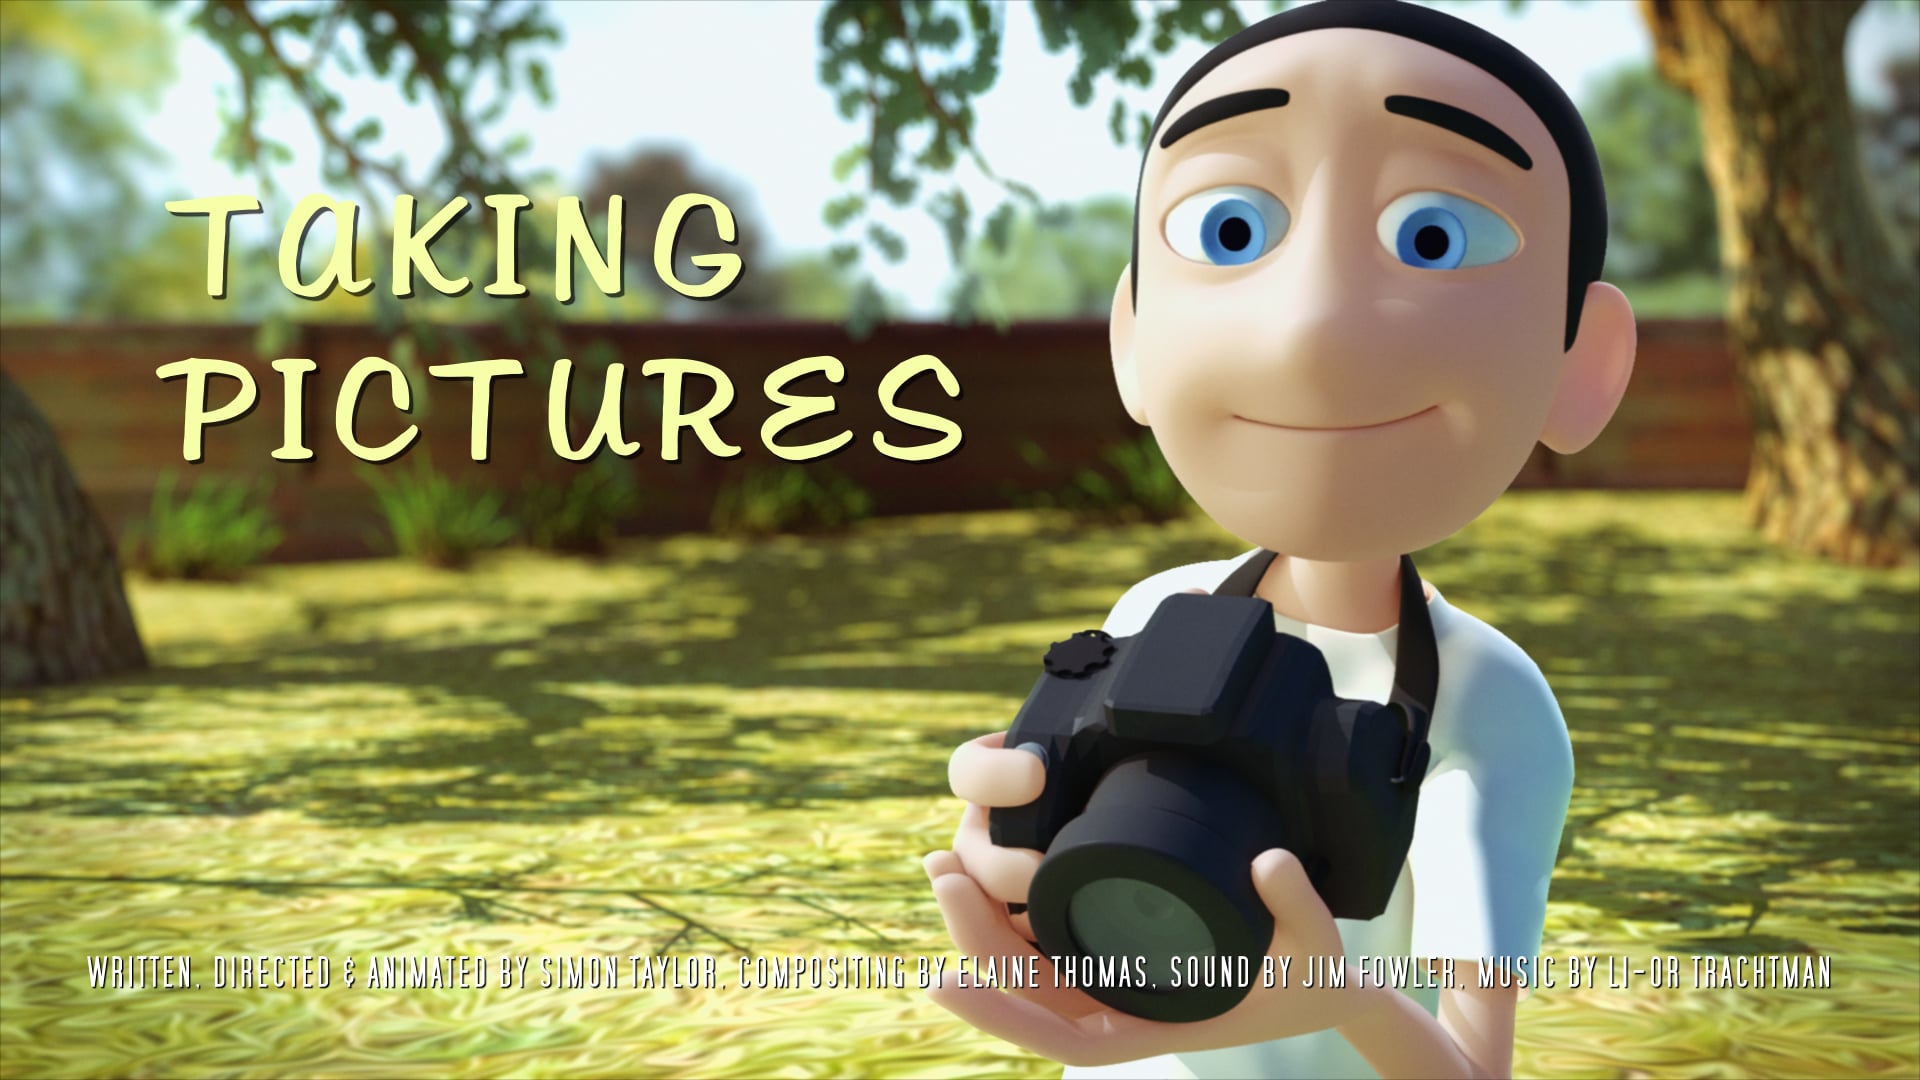 Taking Pictures (Animated Short Film)